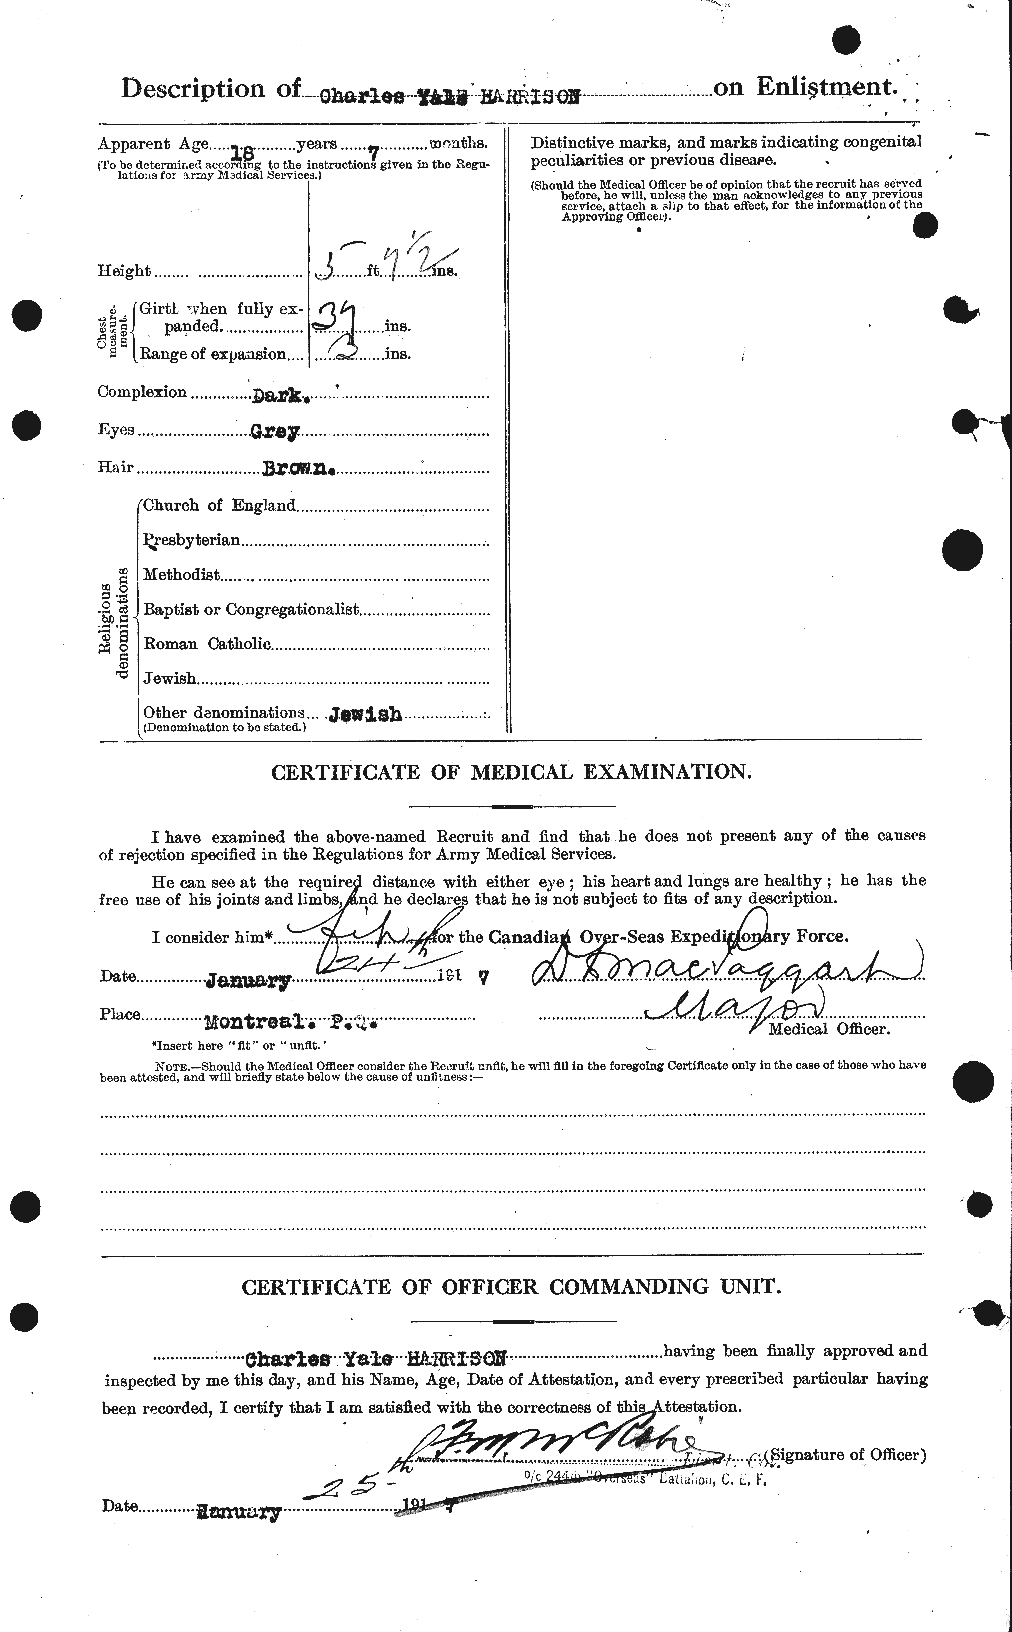 Personnel Records of the First World War - CEF 380290b